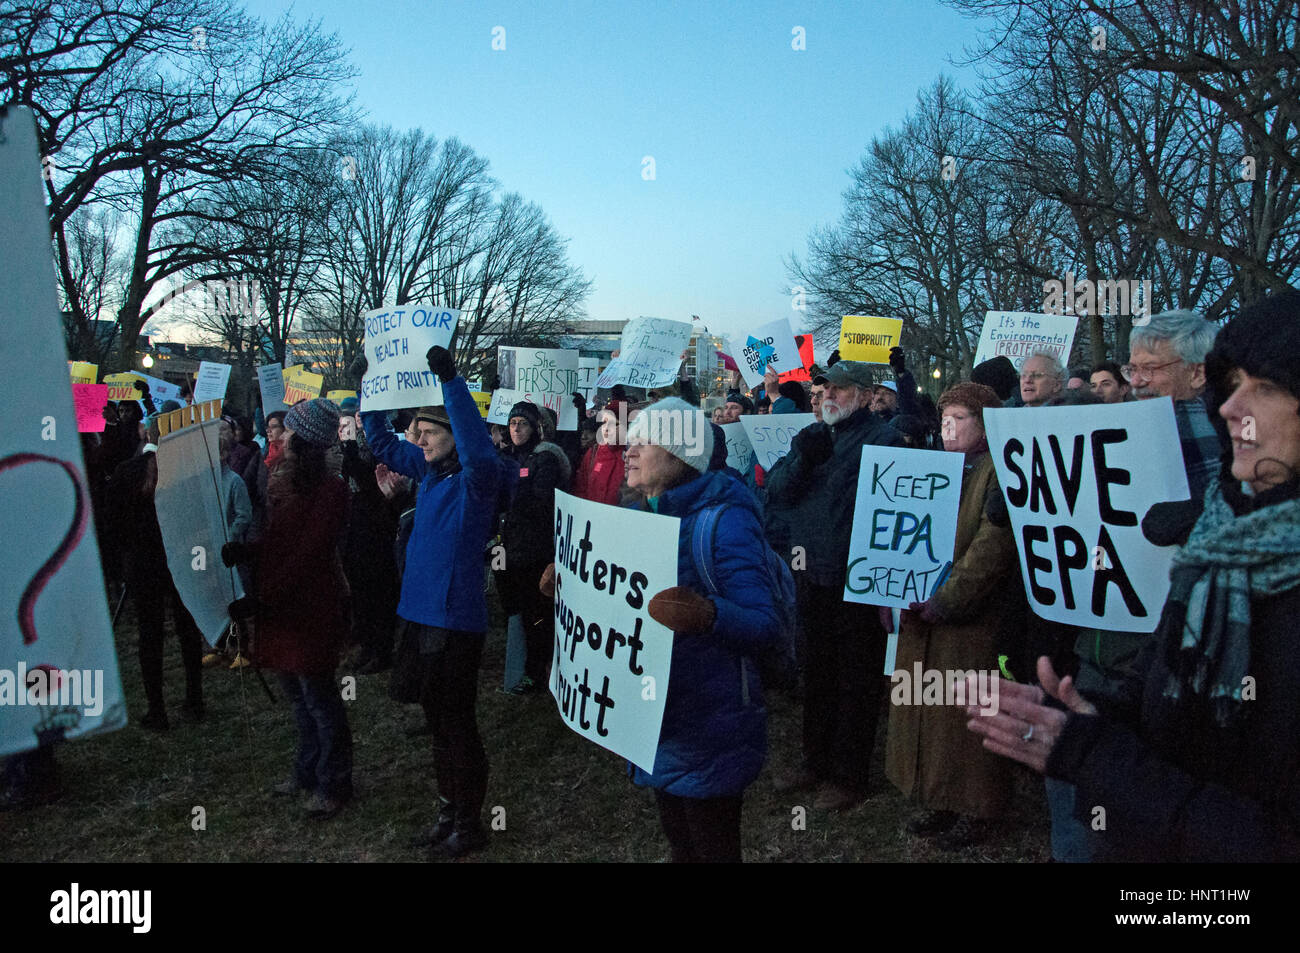 Washington DC, USA. 15th February, 2017. Demonstrators on Capitol Hill protest against the nomination of Scott Pruitt as Administrator of the Environmental Protection Agency. Kirk Treakle/Alamy Live News Stock Photo